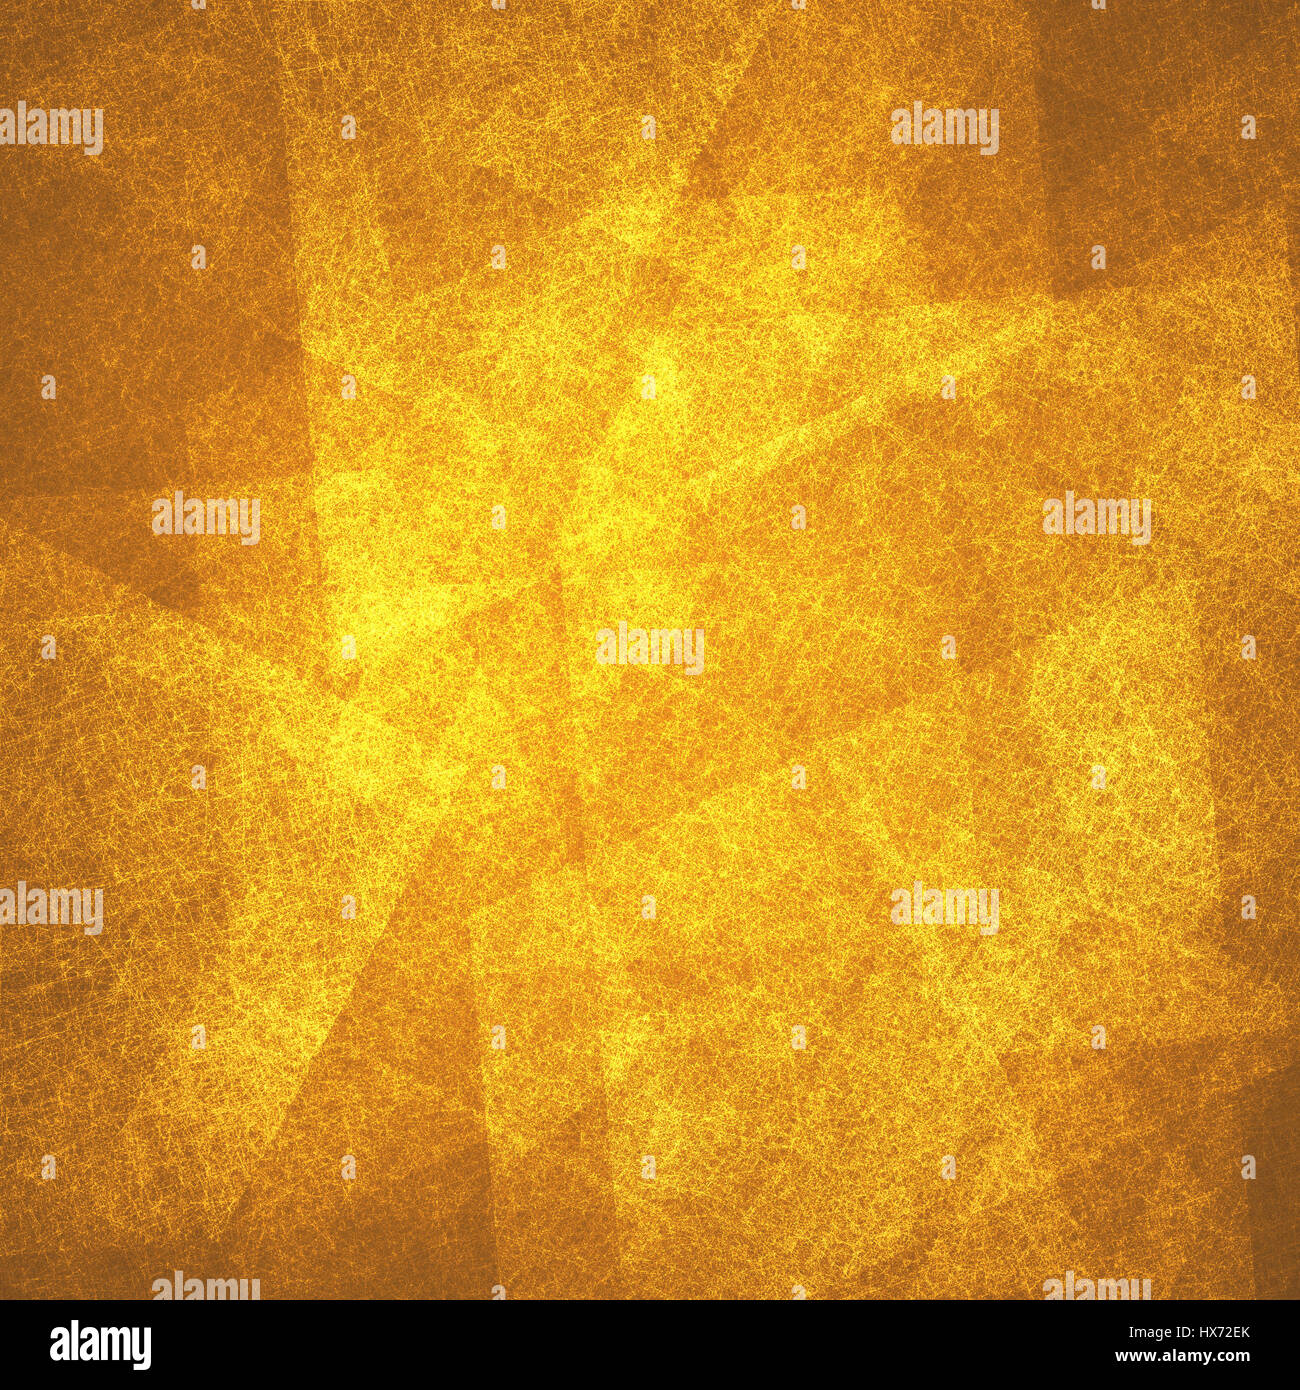 fancy gold background design with modern abstract layered shapes in geometric pattern Stock Photo